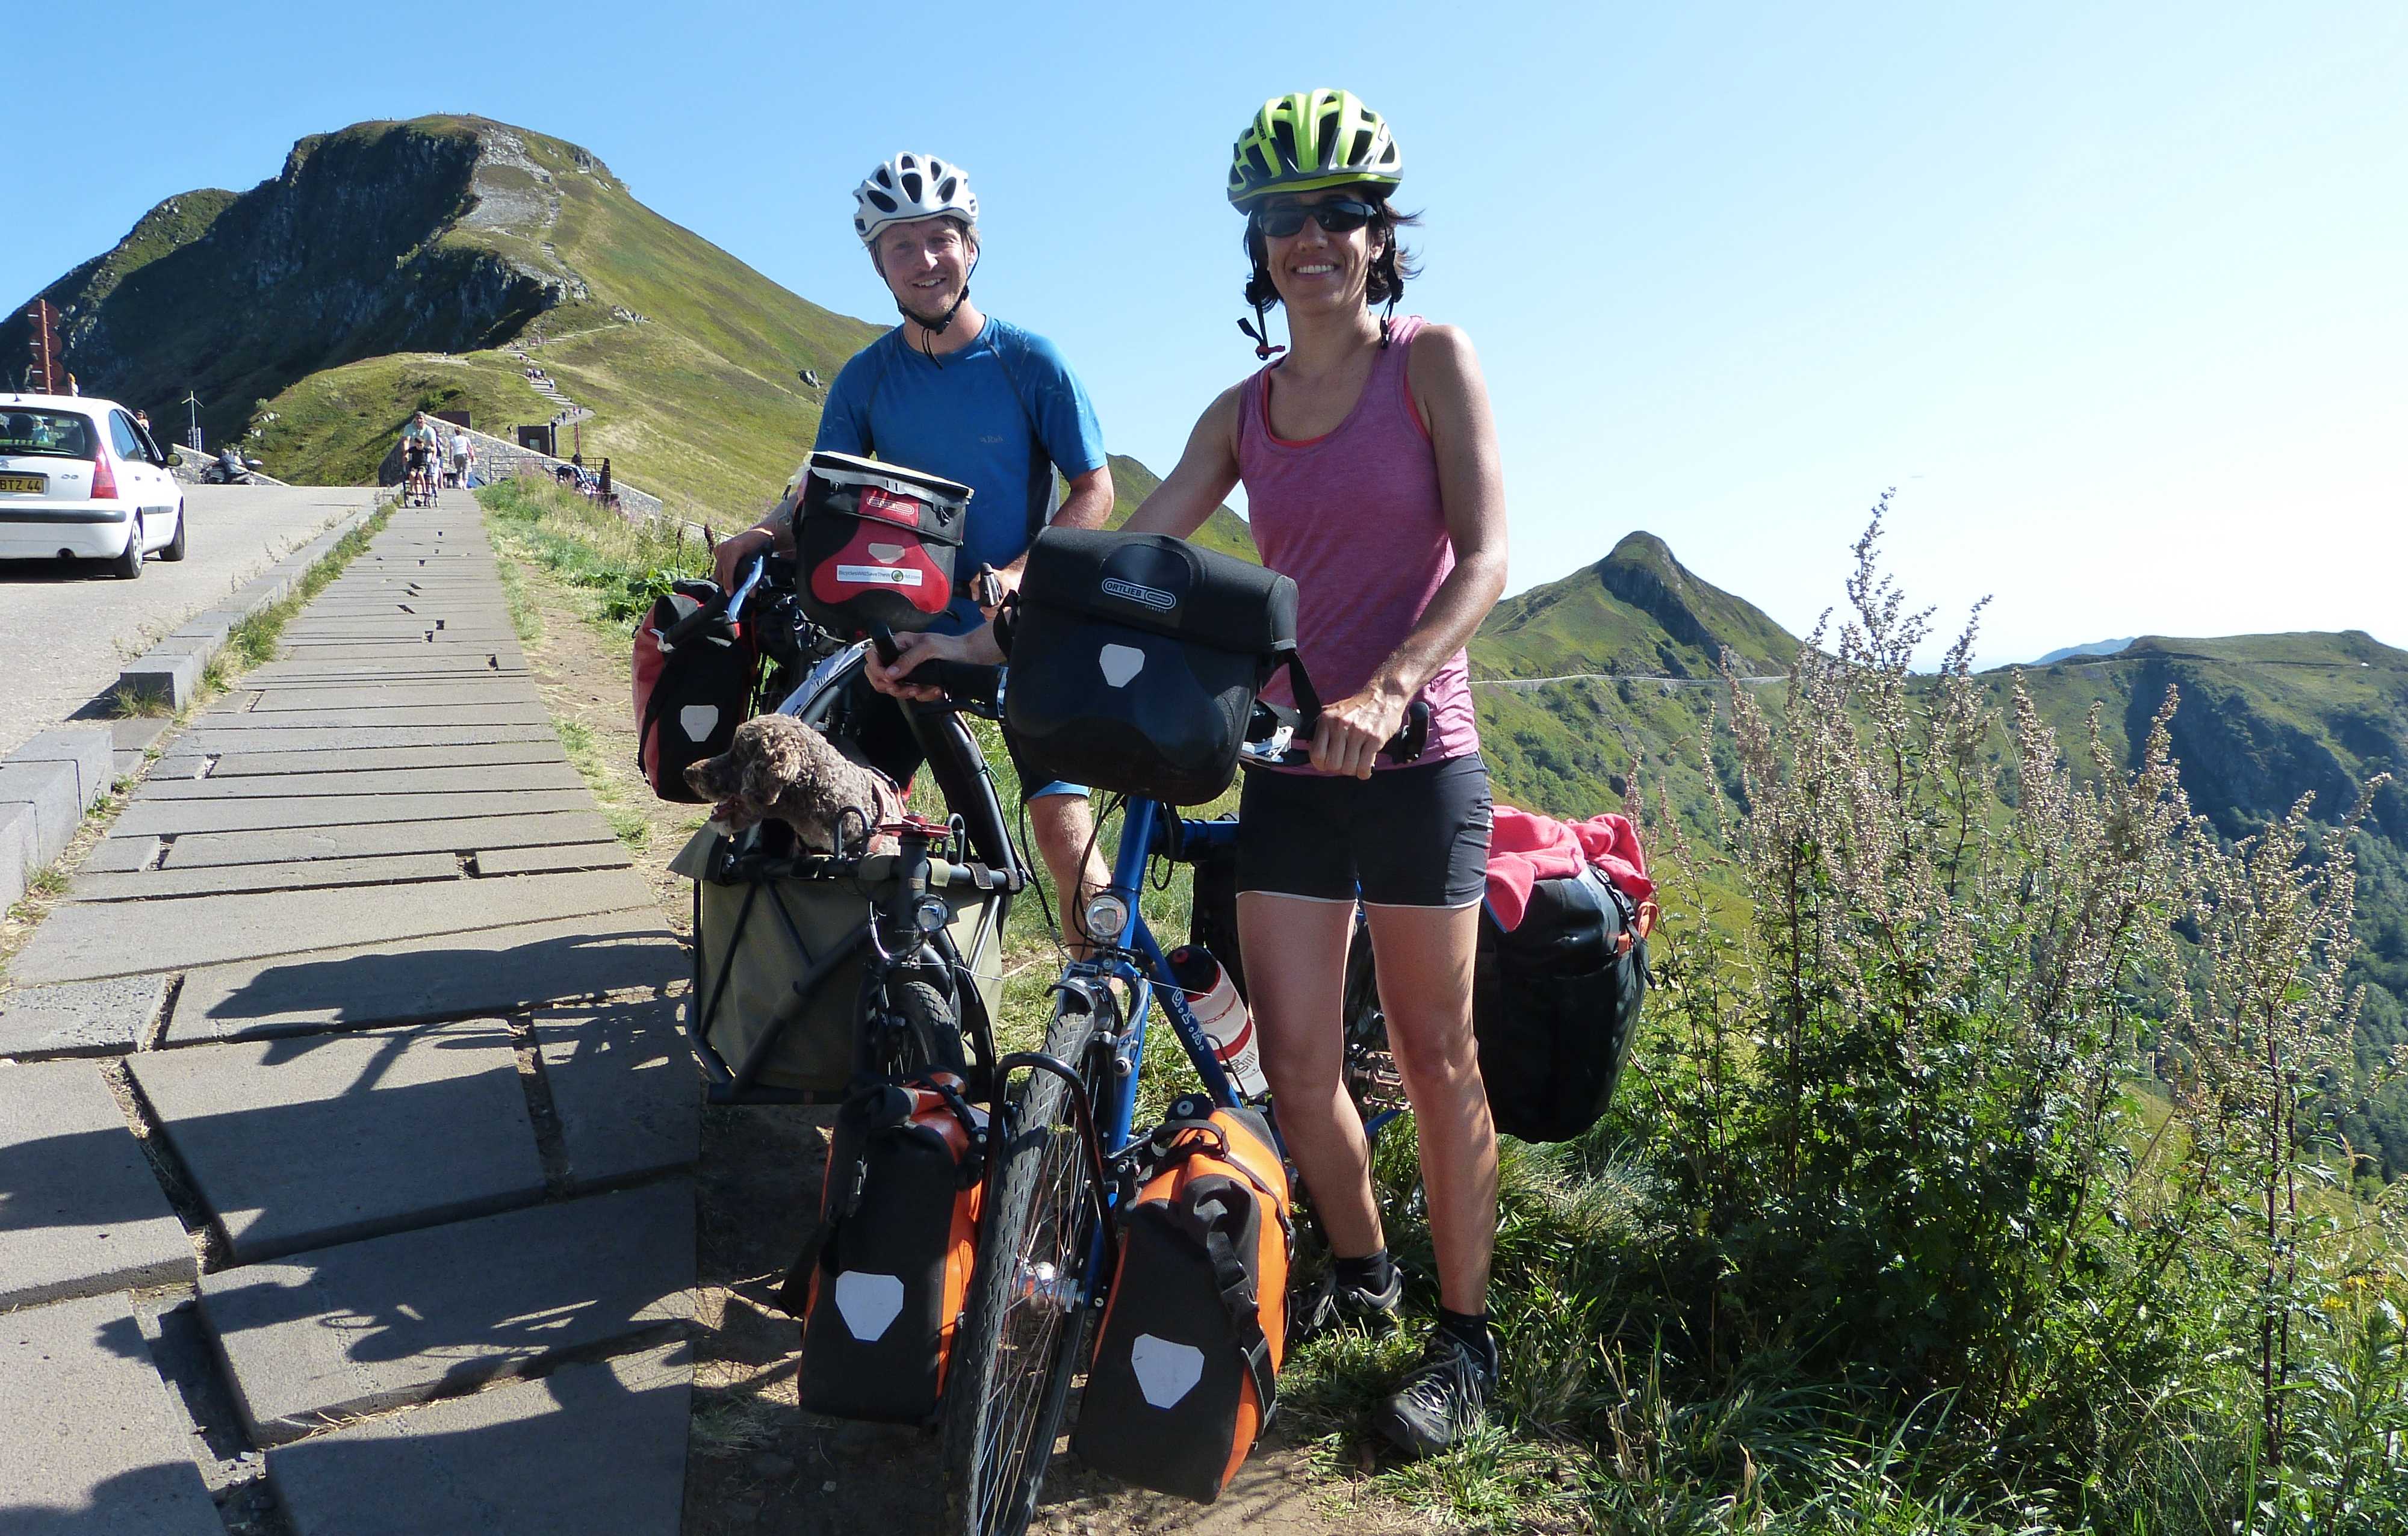 Looking very happy to have conquered the Pas de Peyrol, with the Puy Mary in the background